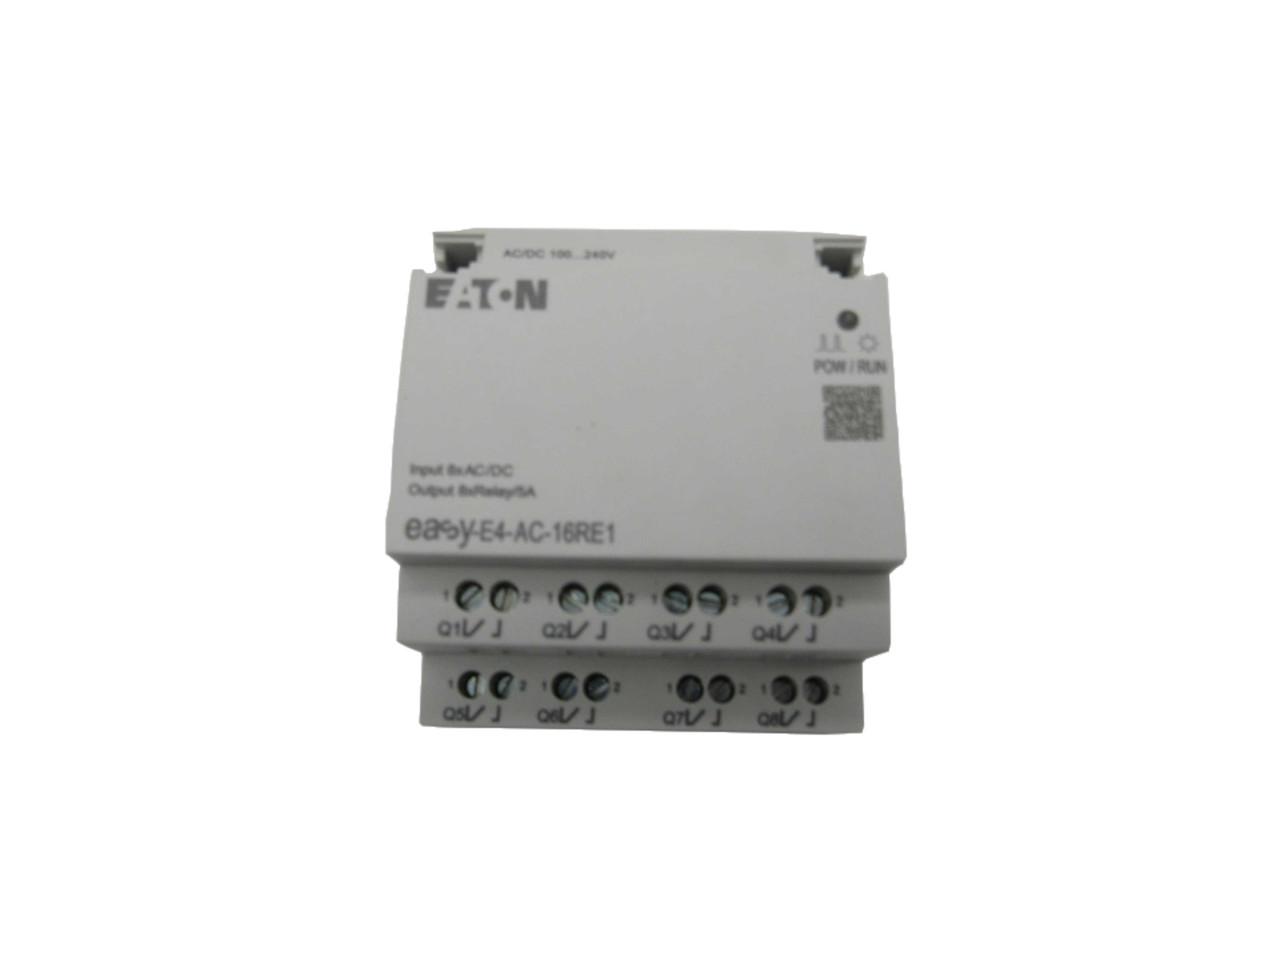 Eaton EASY-E4-AC-16RE1  The easyE4 is the world’s premier nano PLC. Containing 12 I/O with the capability to be expanded to a network of up to 188 I/O points, the easyE4 provides the ideal solution for lighting, energy management, industrial control, irrigation, pump control, H